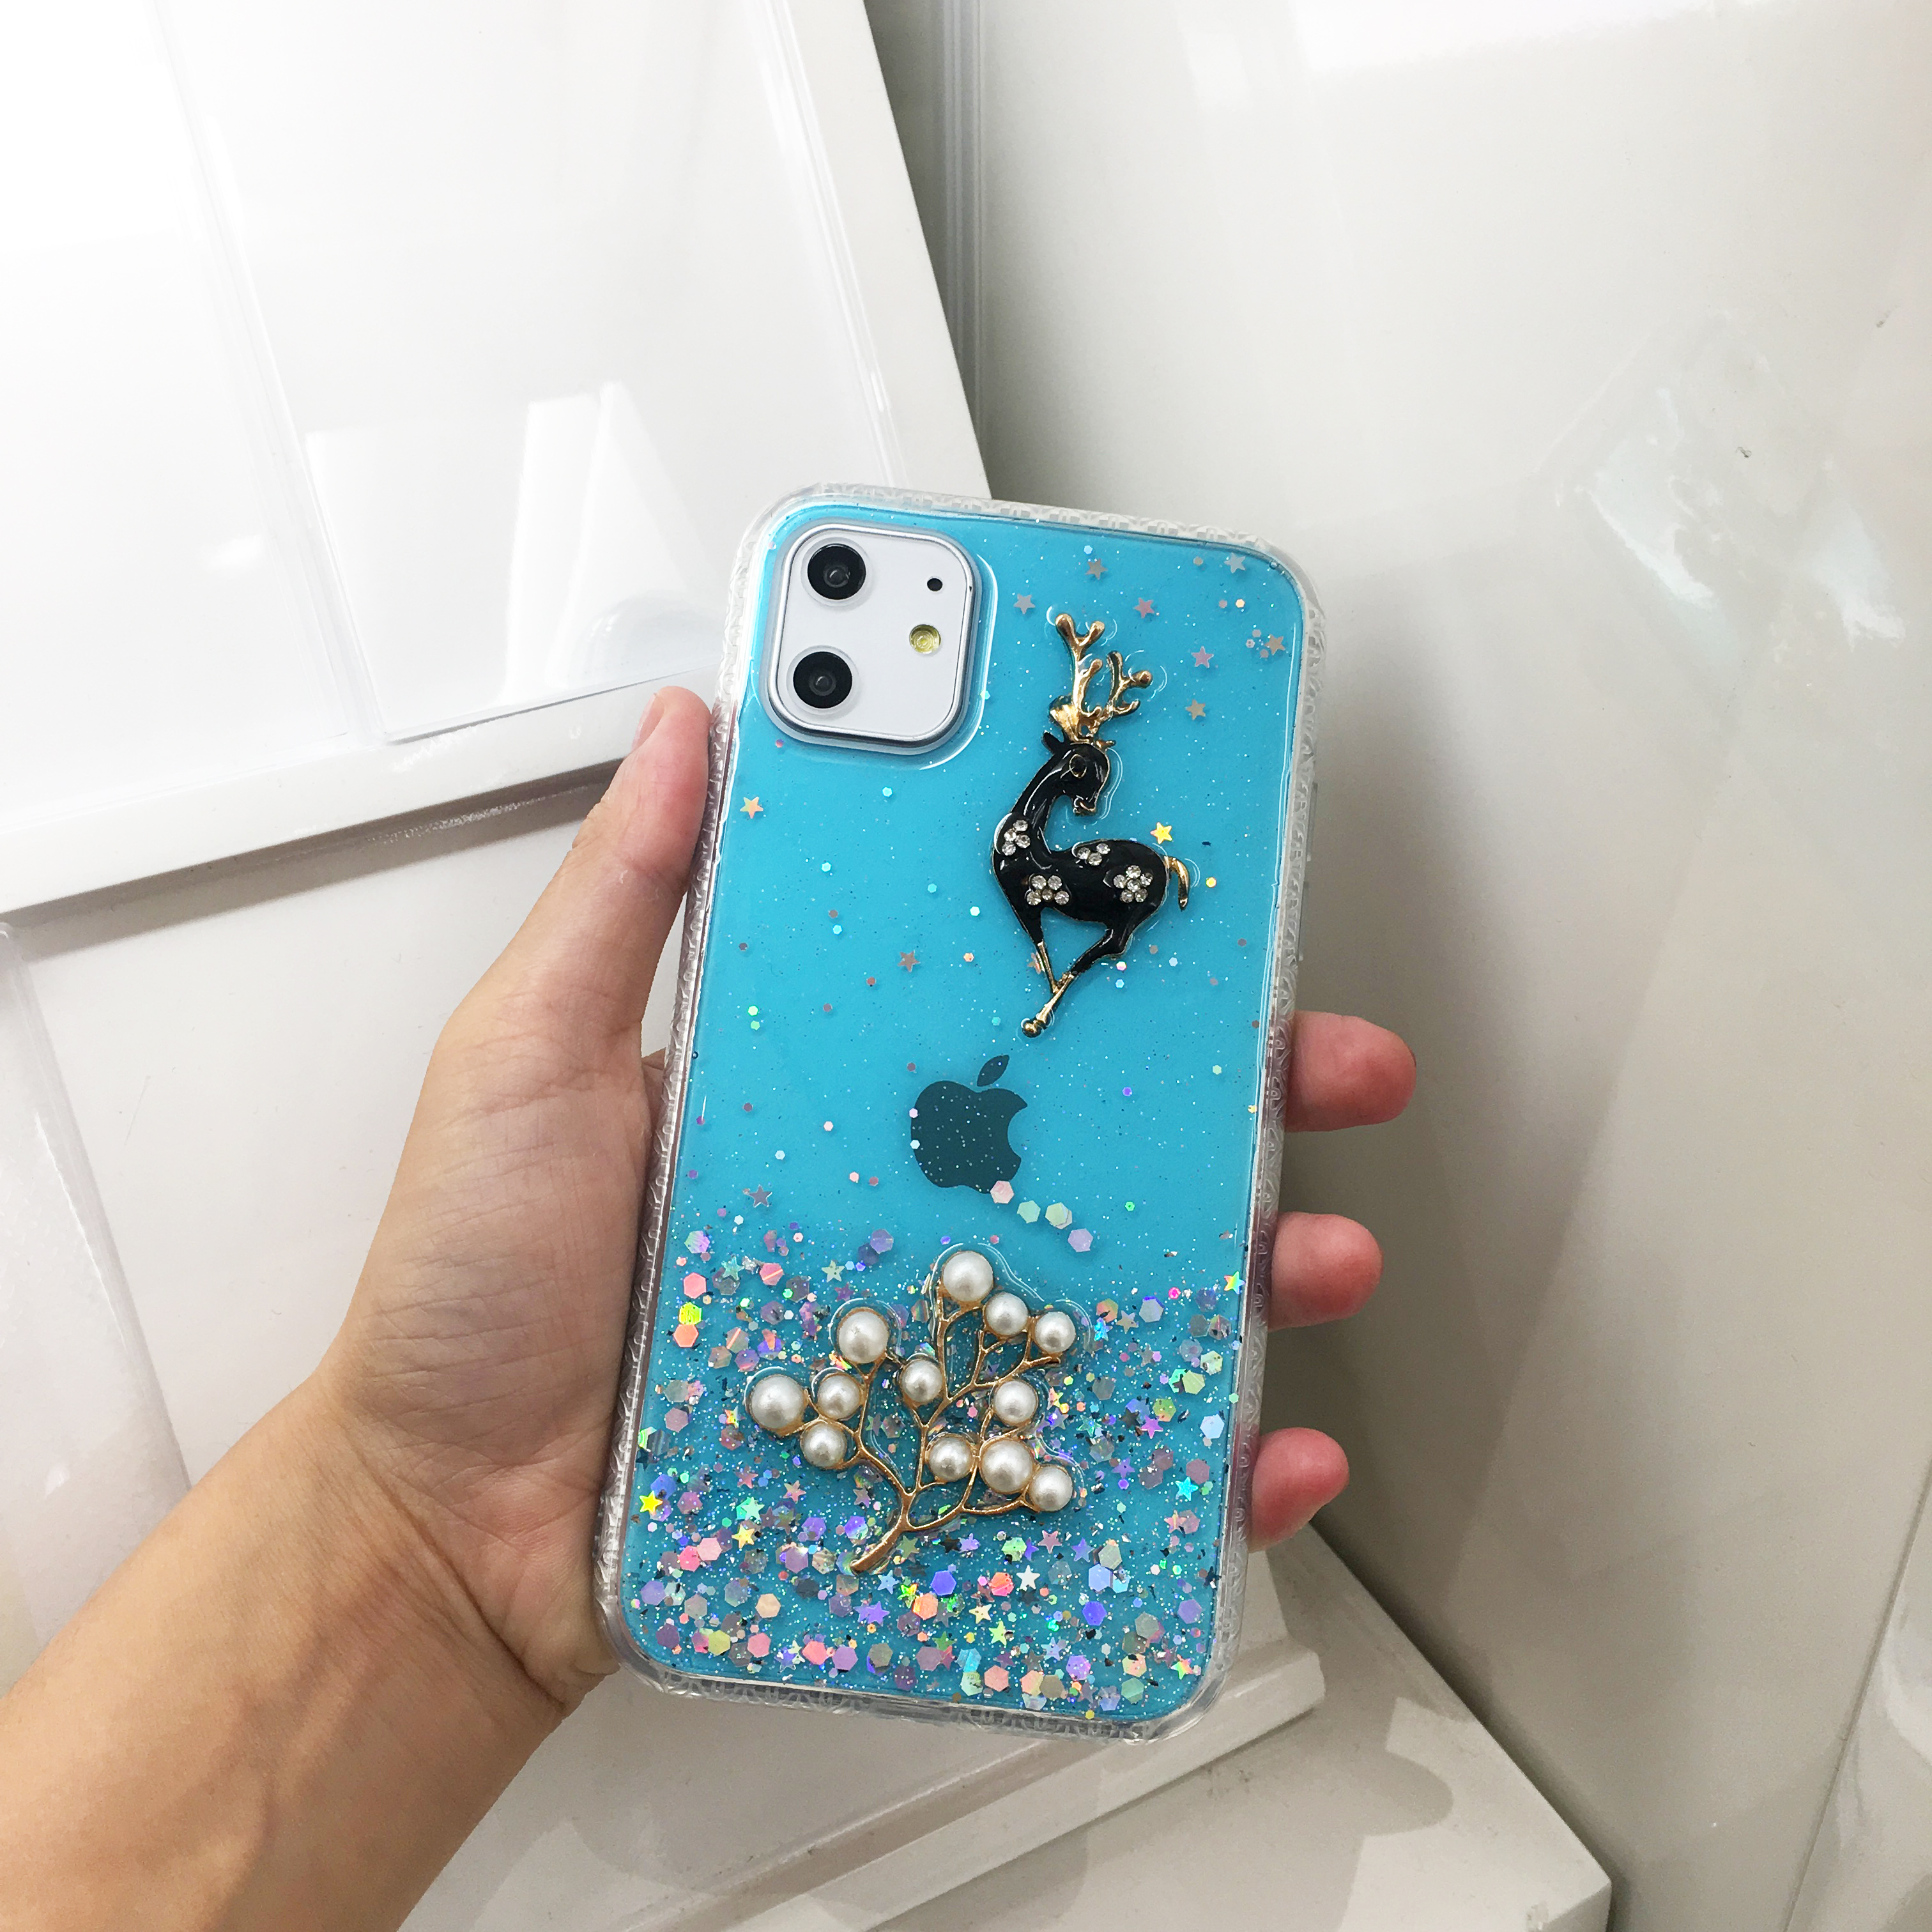 iPHONE 11 (6.1in) 3D Deer Crystal Diamond Shiny Case (Blue)